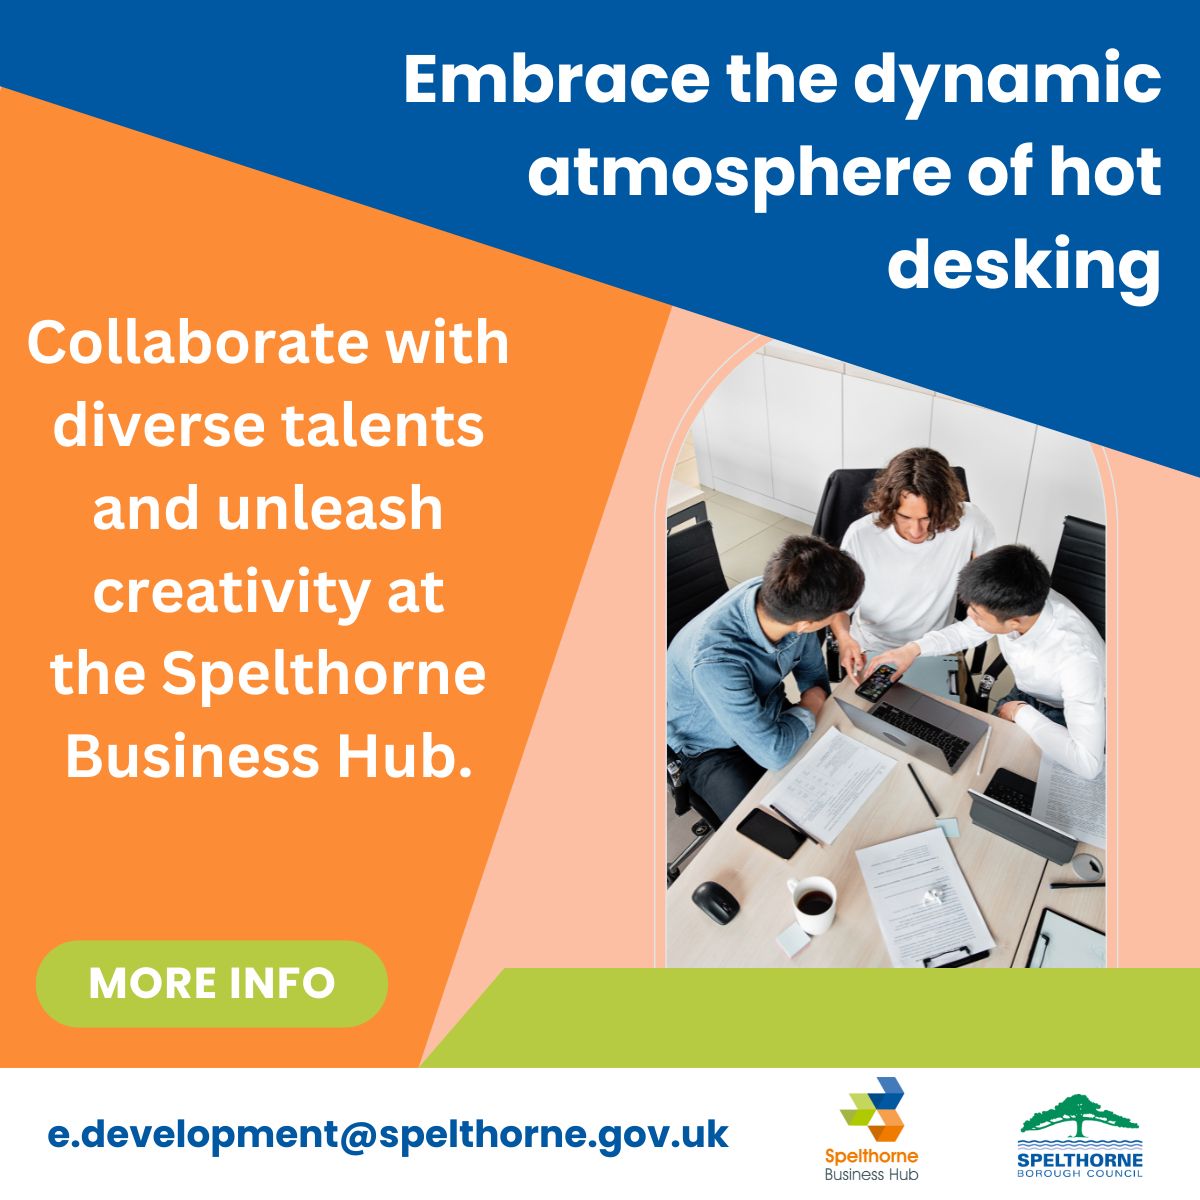 Elevate your workday with Spelthorne Business Hub's modern hot desk setup. With superfast free Wi-Fi 
and a mix of communal and quiet spaces, find your perfect balance between productivity and comfort. 
#ProductivityBoost #SpelthorneBusinessHub #SpelthorneBoroughCouncil